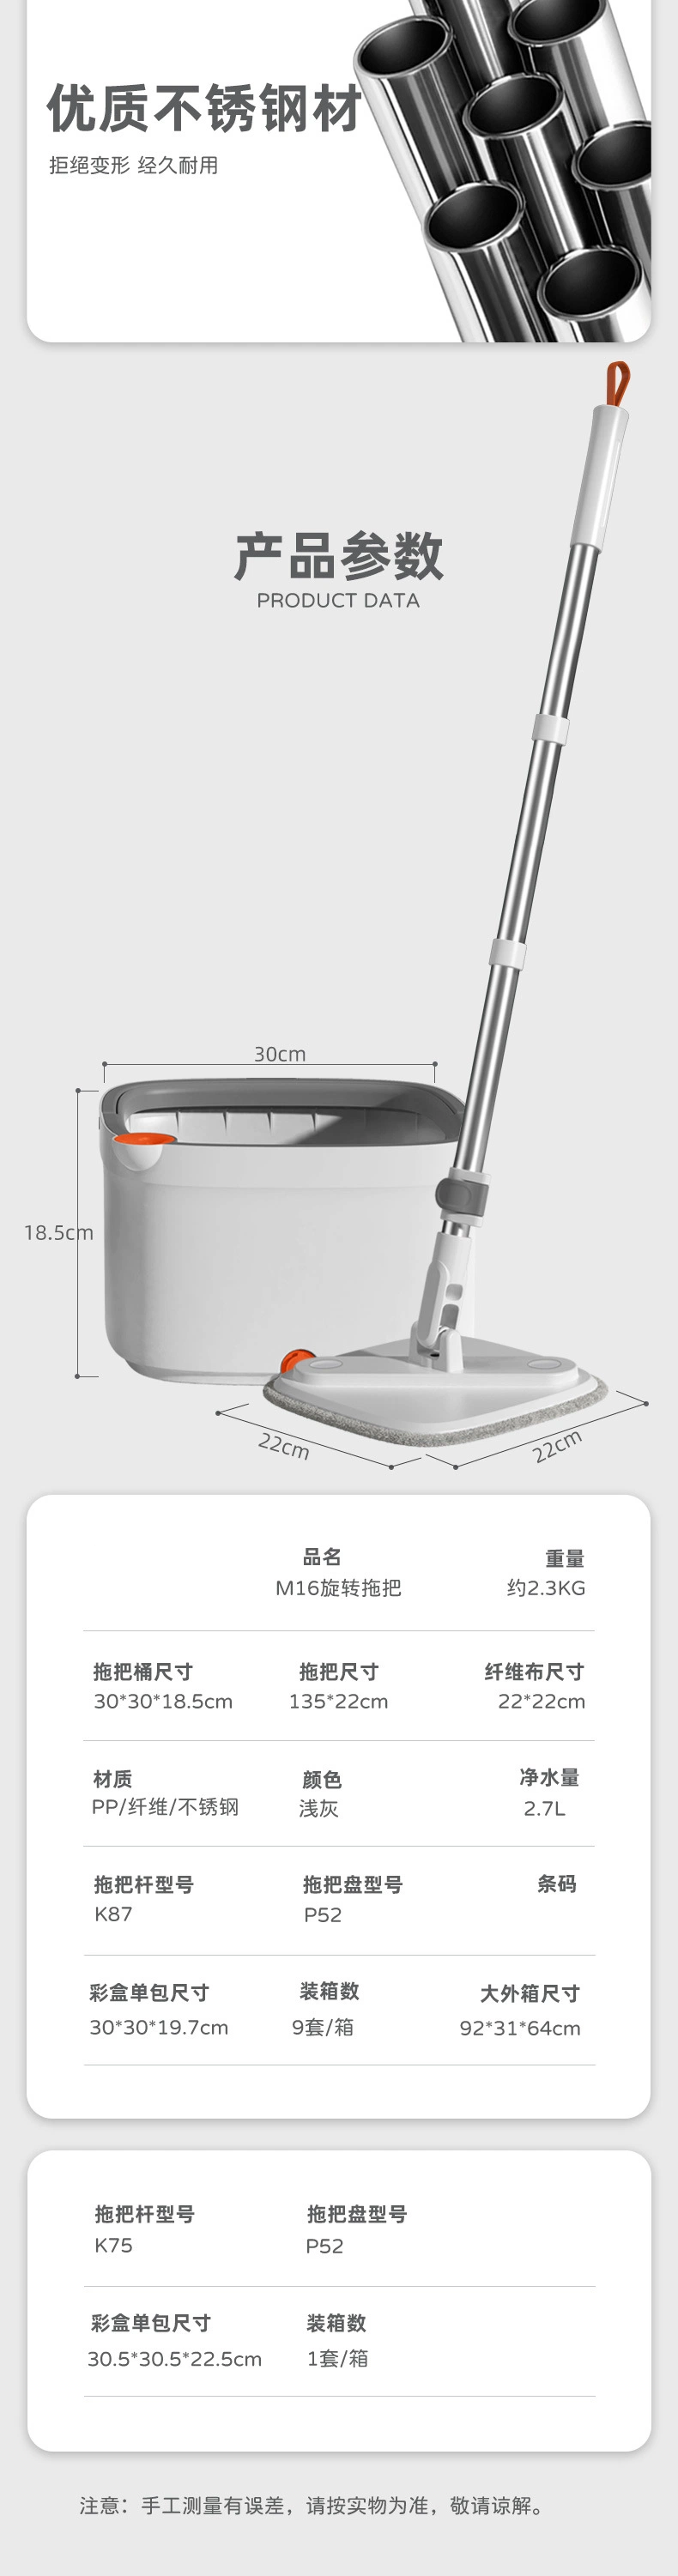 Cleaning and Sewage Separation Plate Mop Flat Floor Mop and Pads Mop for Floor Cleaning with X Microfiber Pads Wet and Dry Use Household Cleaning Tools